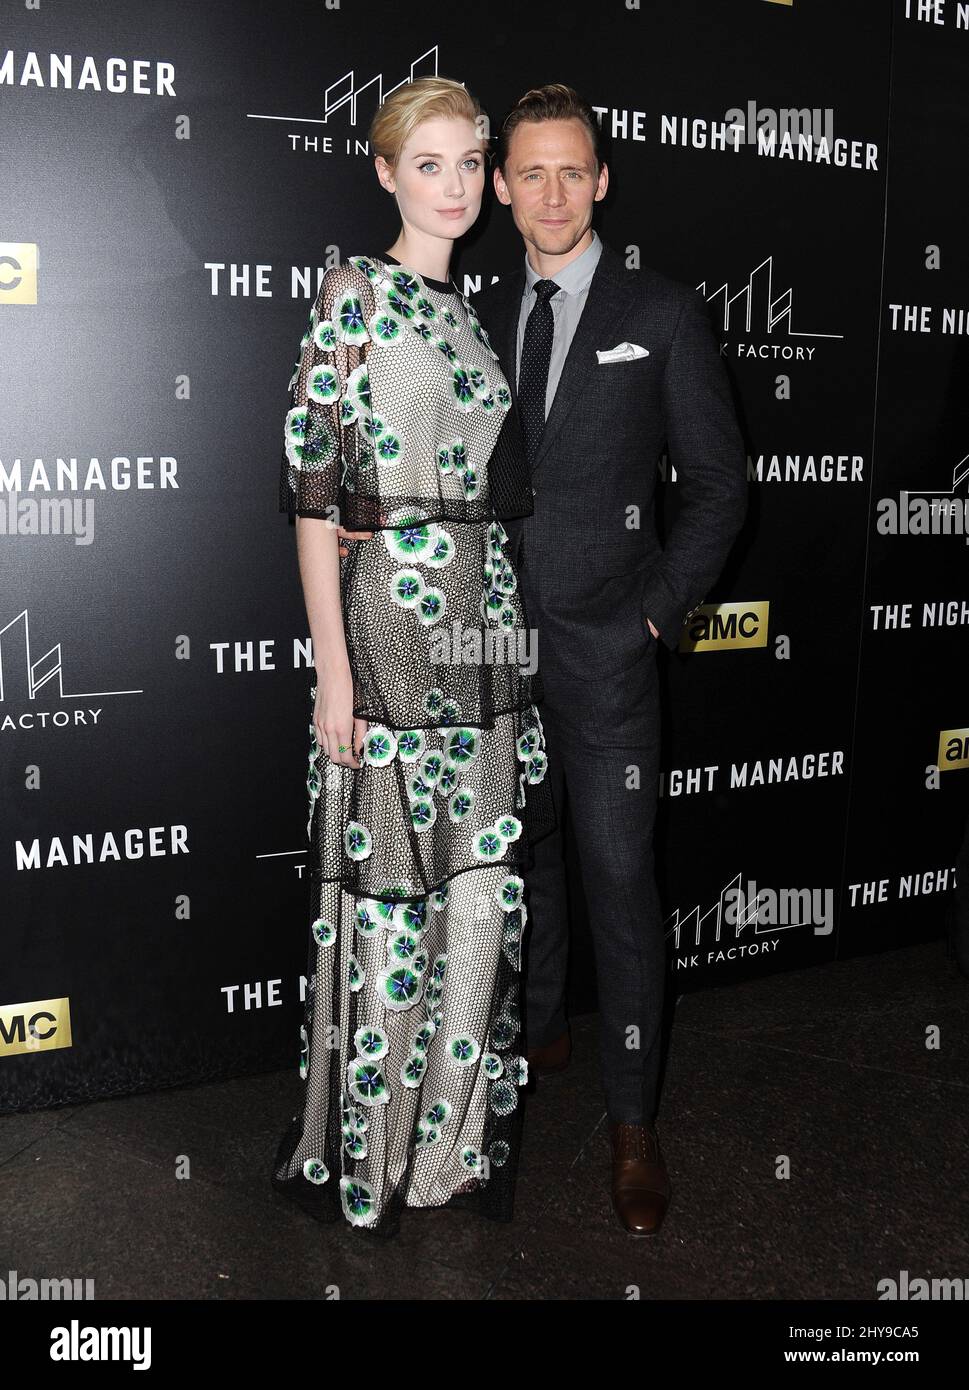 Tom Hiddleston, Elizabeth Debicki attending the premiere of 'The Night  Manager' in Los Angeles Stock Photo - Alamy